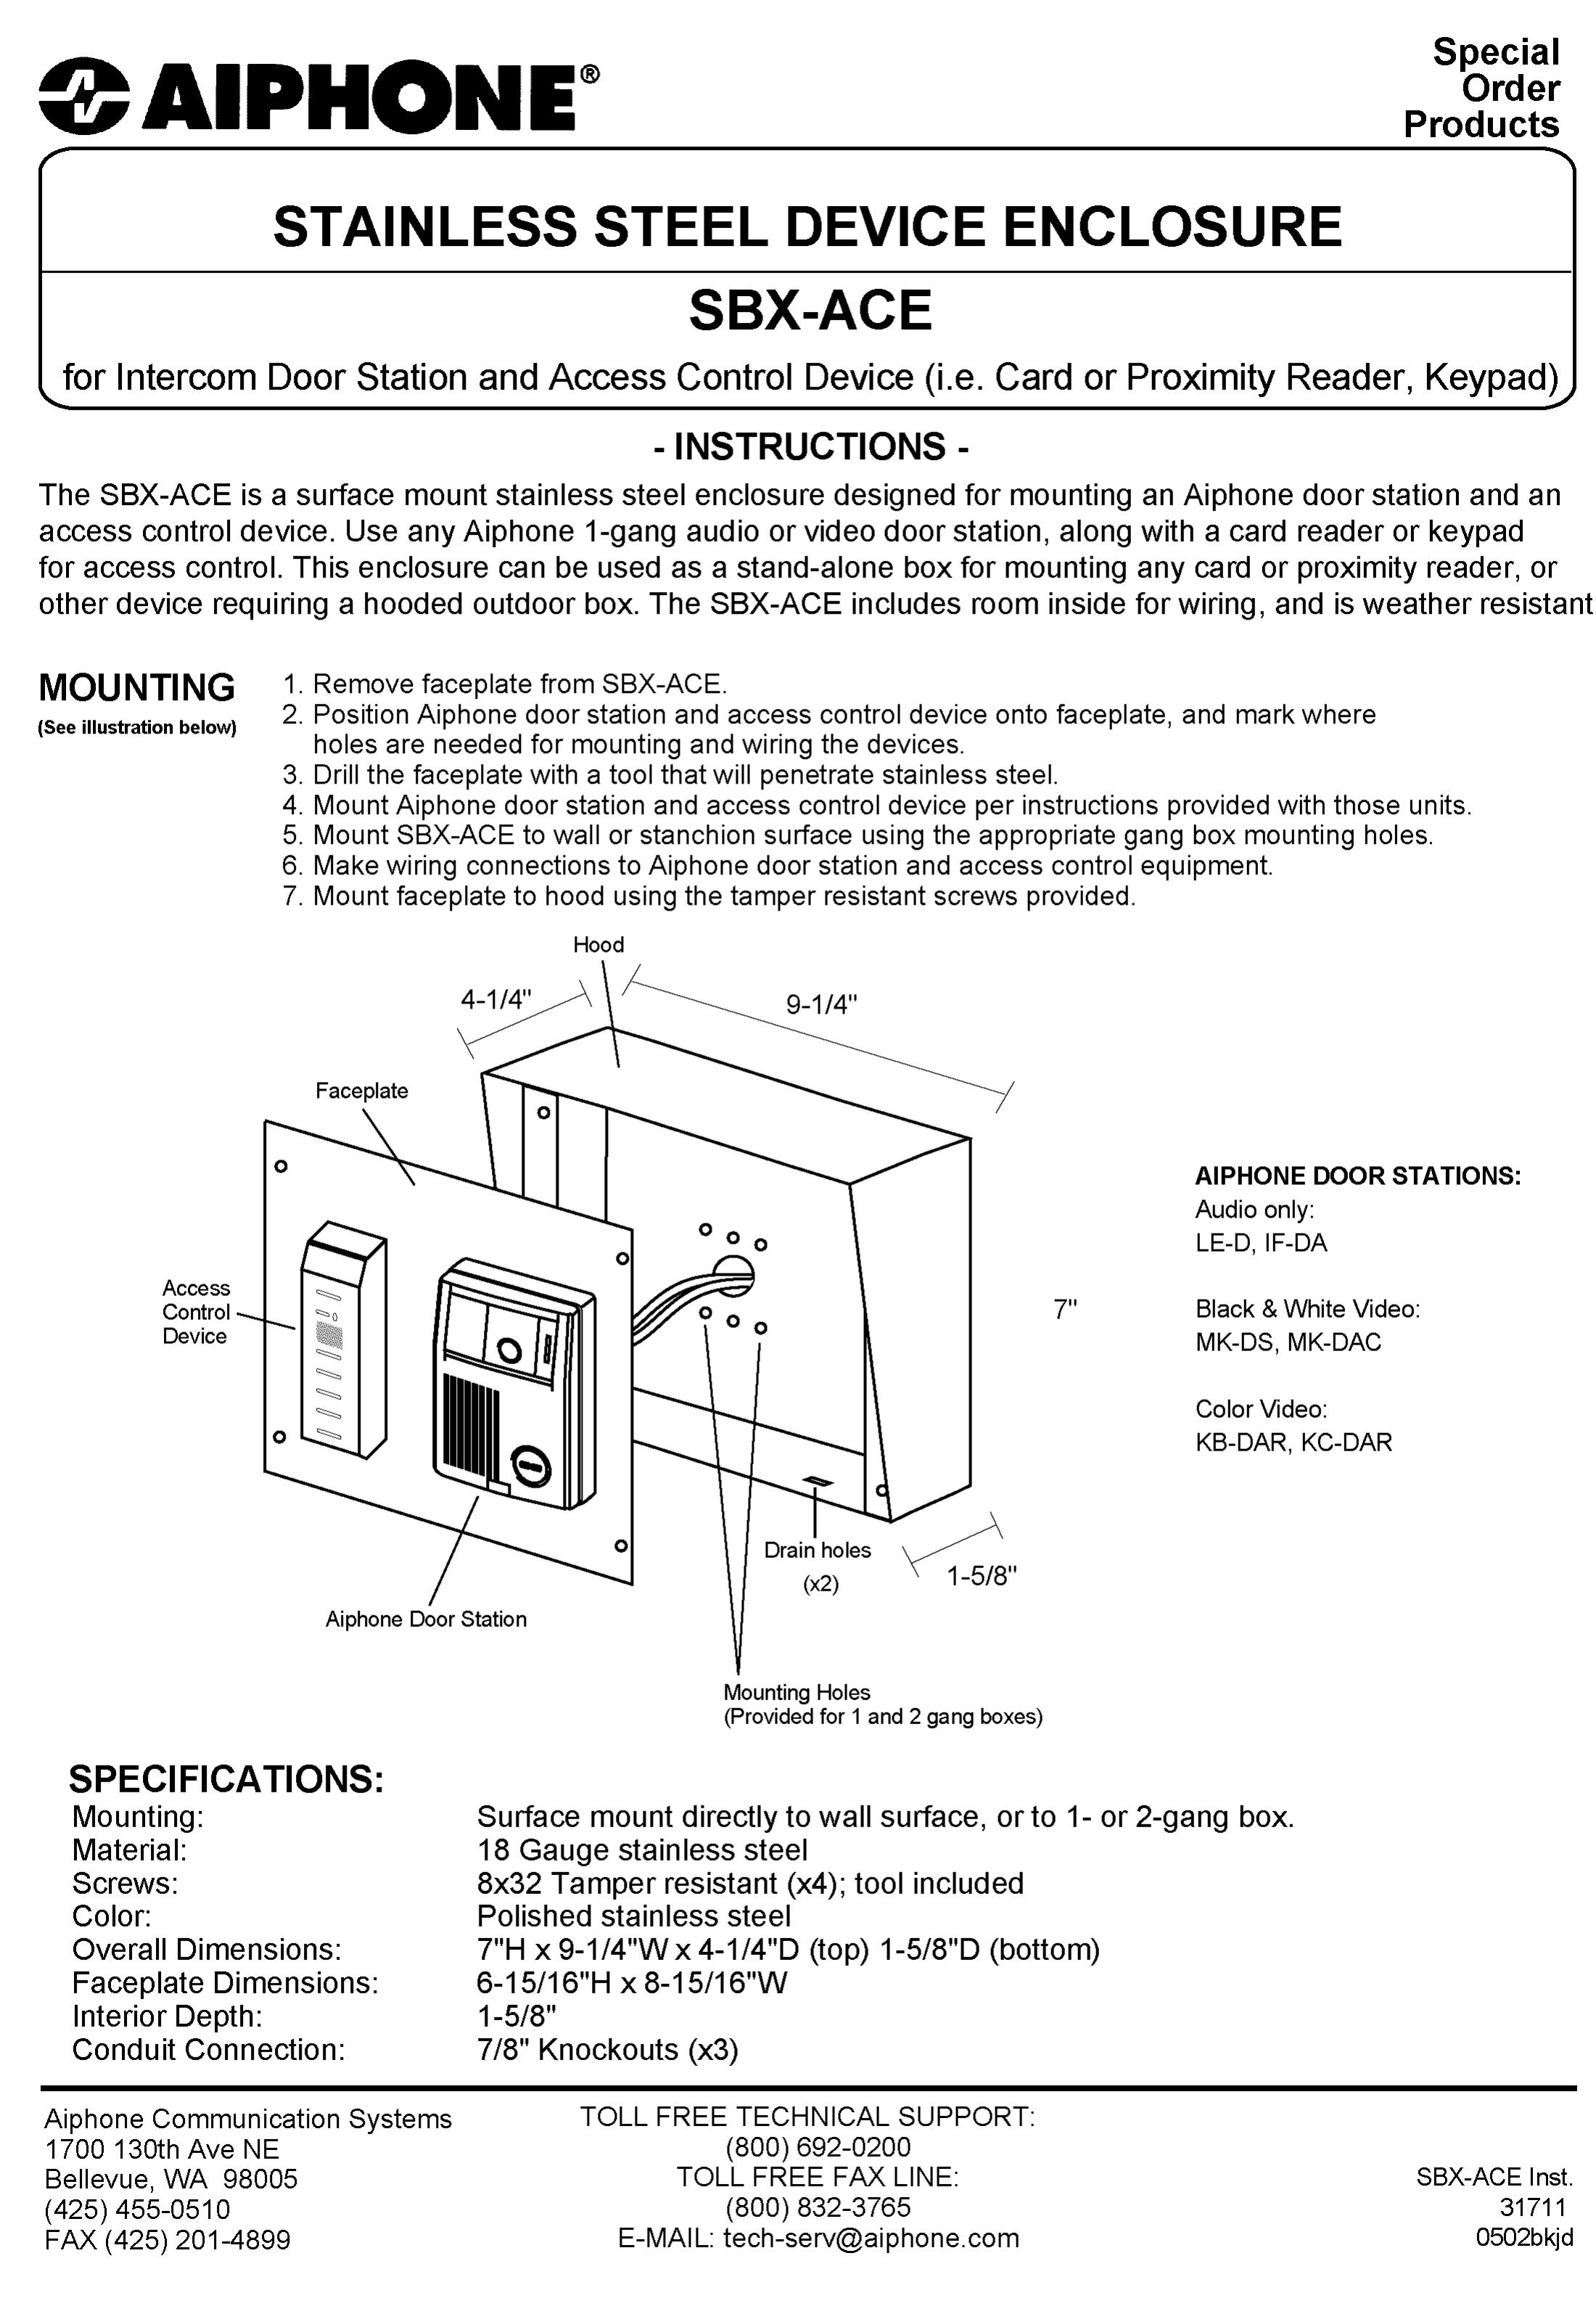 Aiphone SBX-ACE Refrigerator User Manual